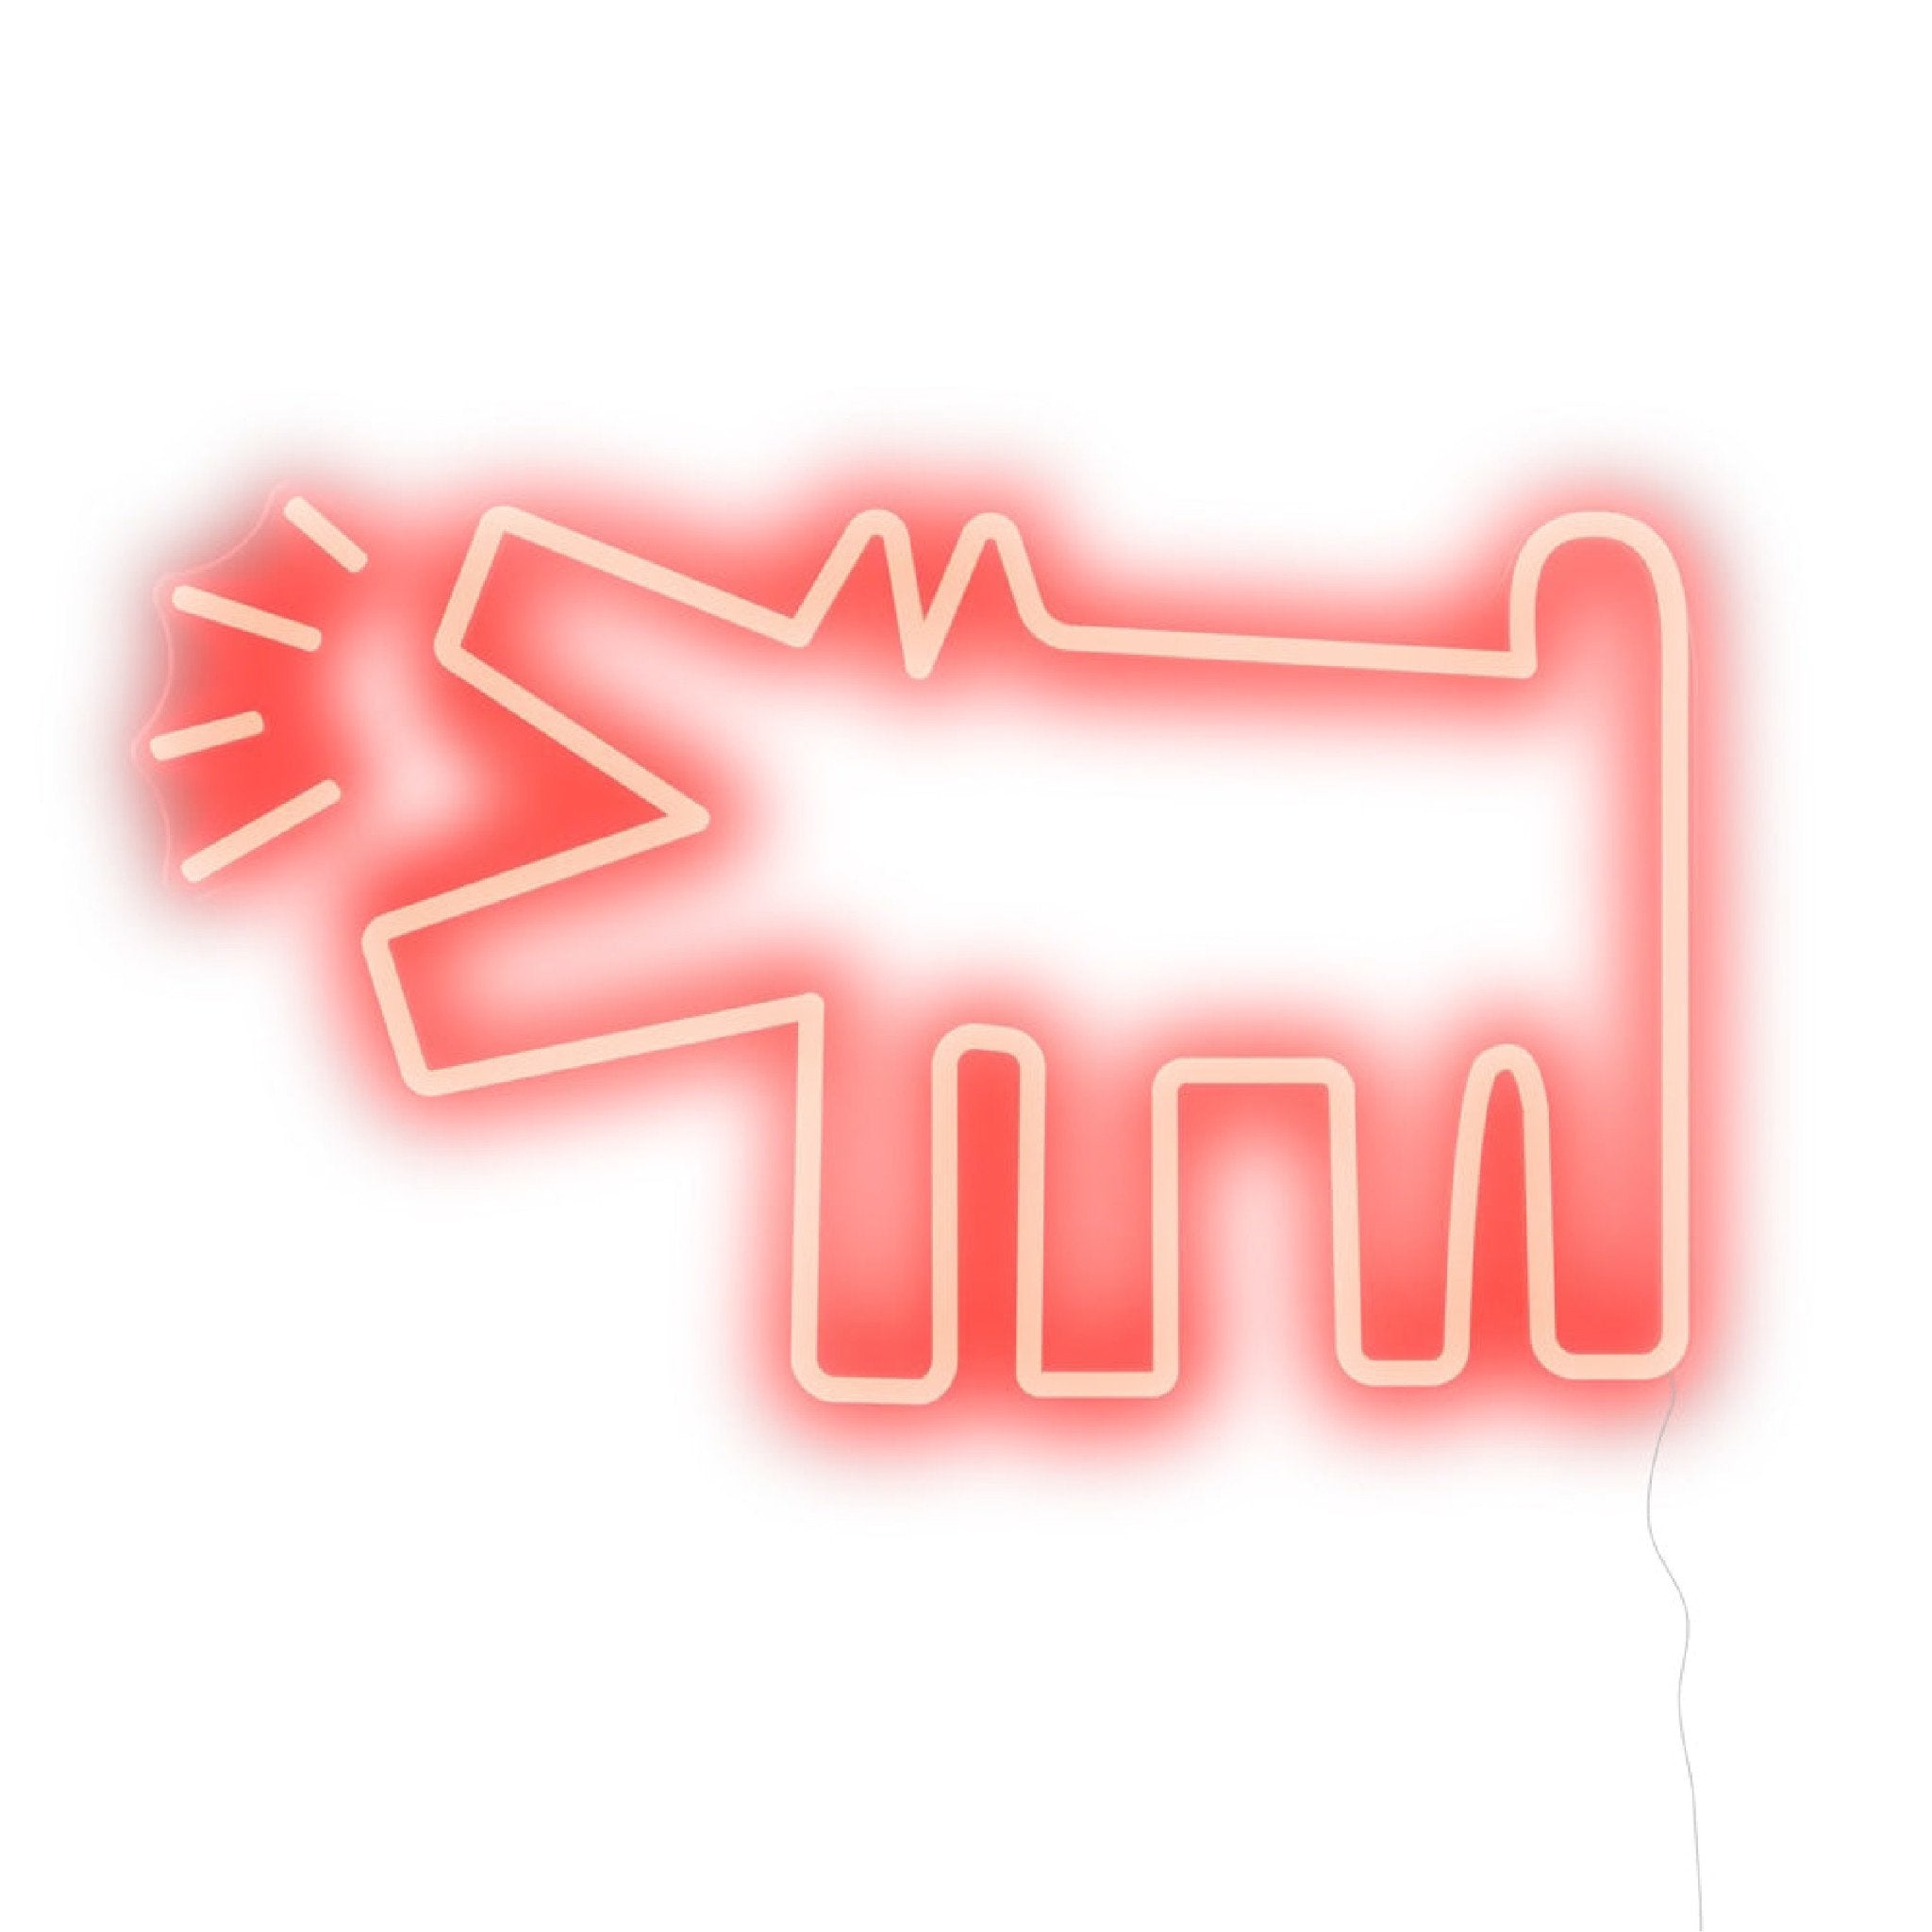 Barking Dog by Keith Haring - LED Neon Sign